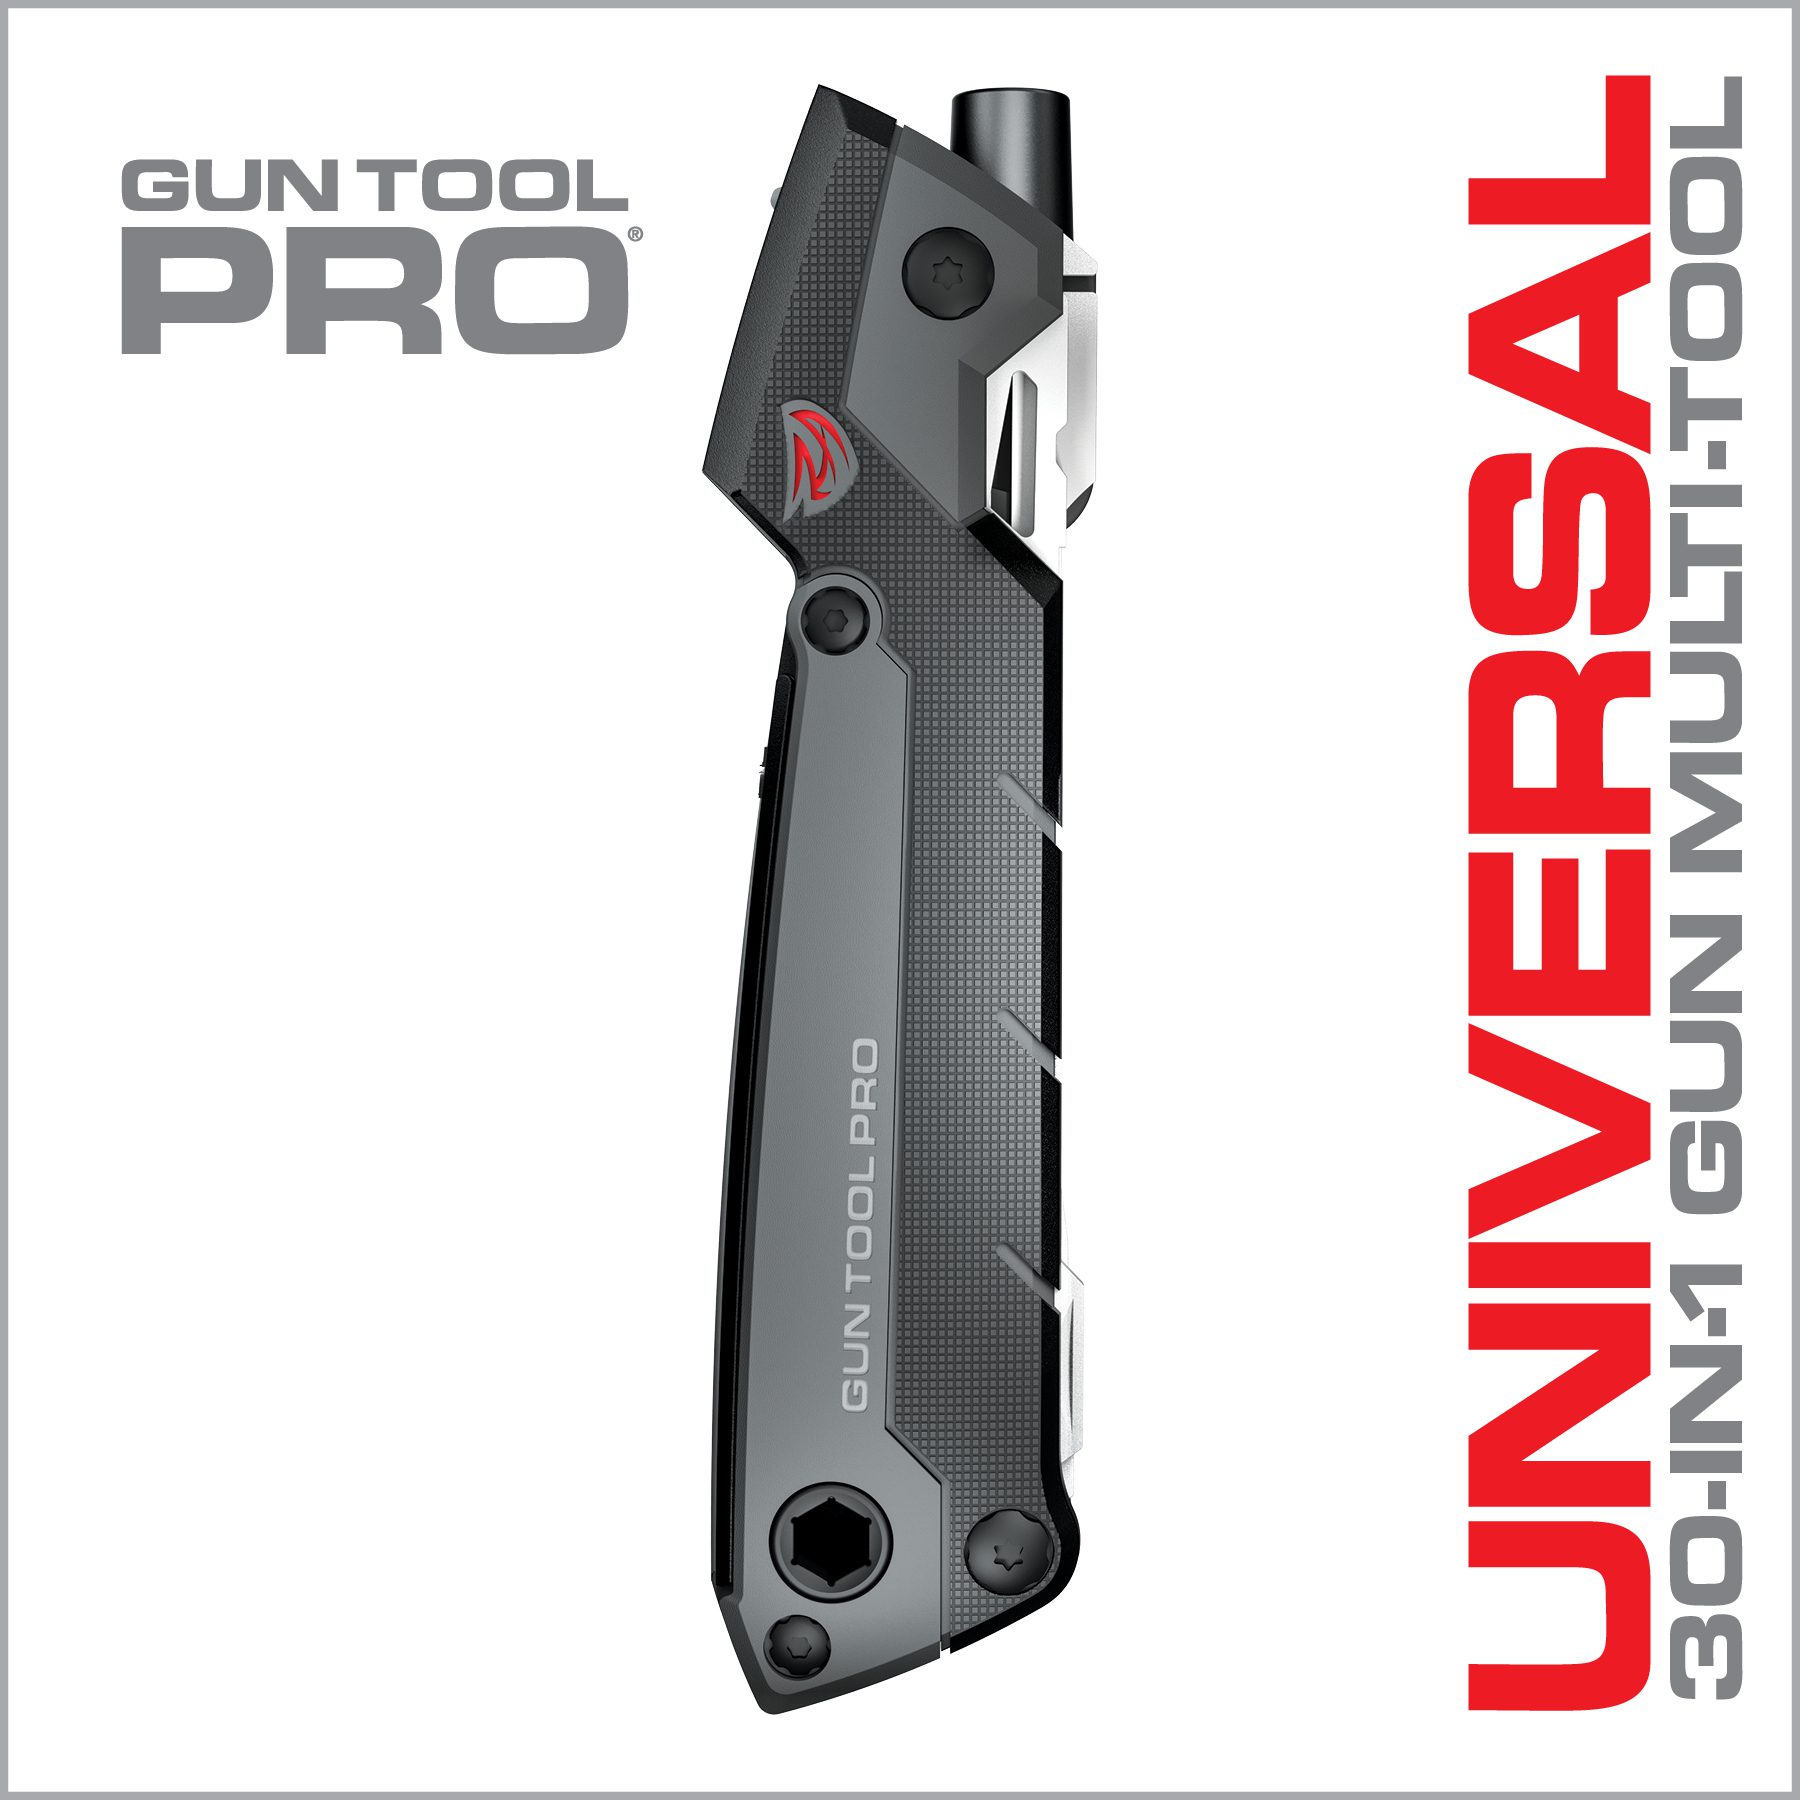 the gun tool pro has been designed to look like it's made out of carbon